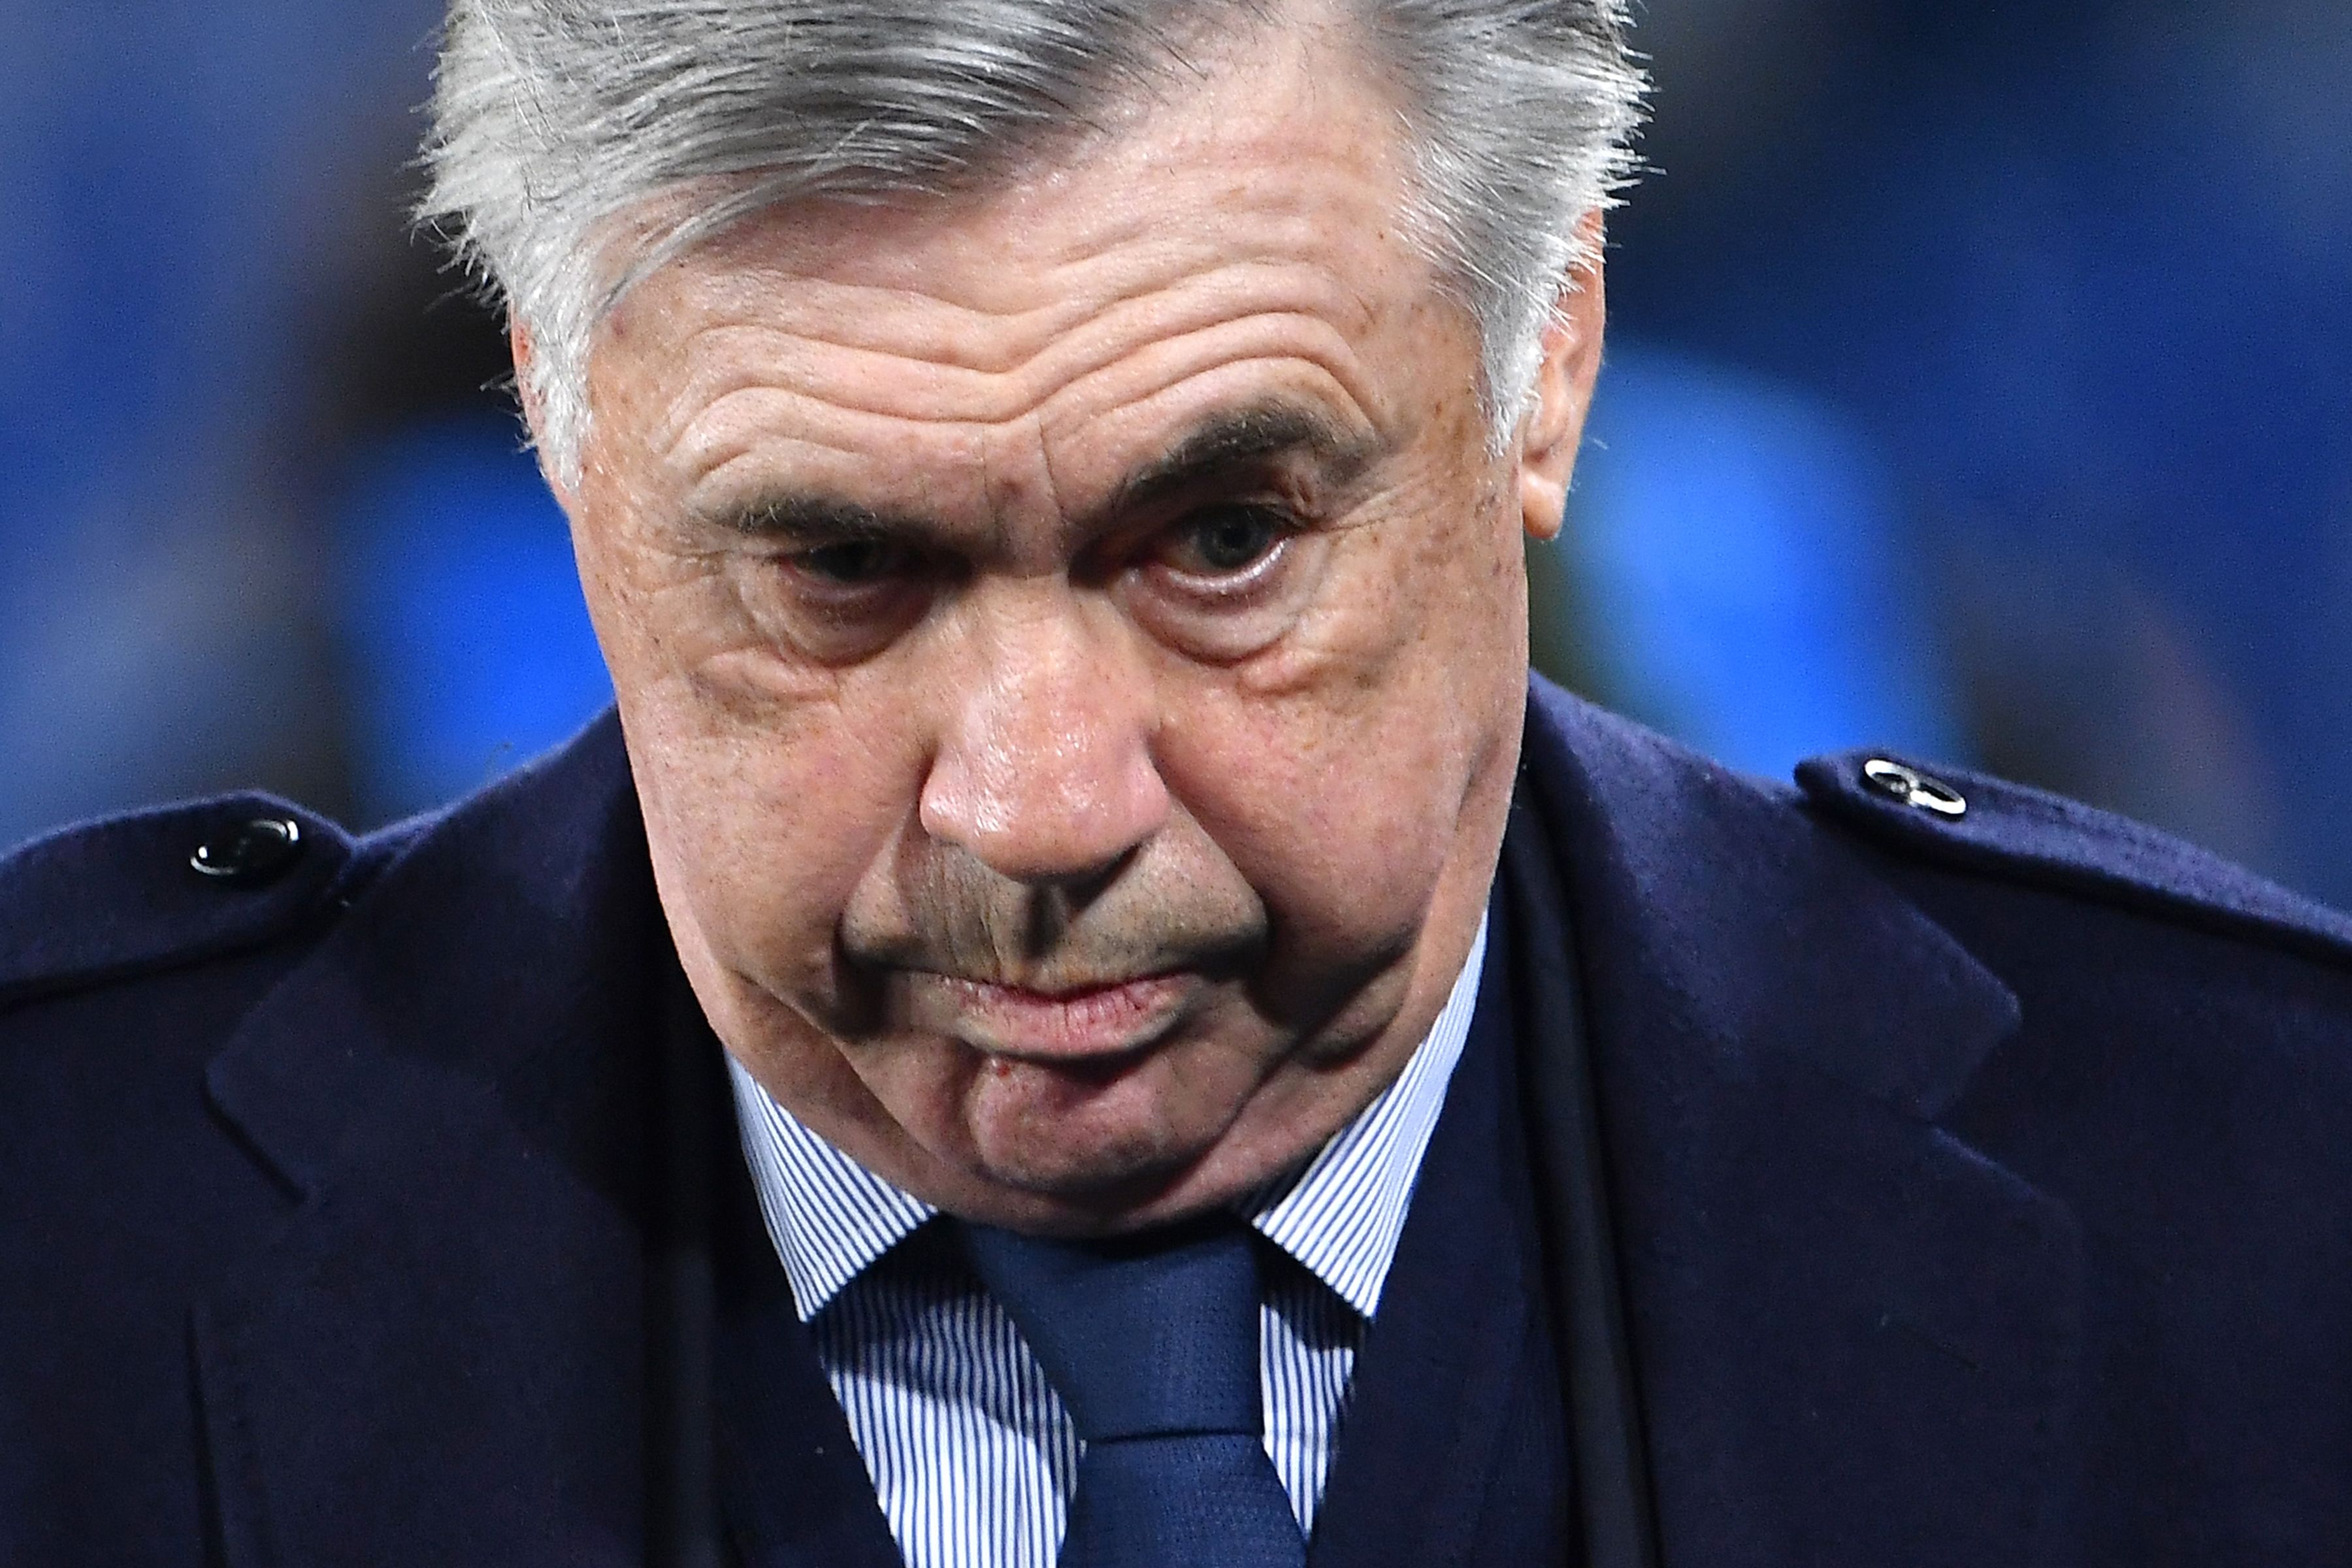 Carlo Ancelotti's final game in charge of Napoli was Tuesday's 4-0 win over Genk.